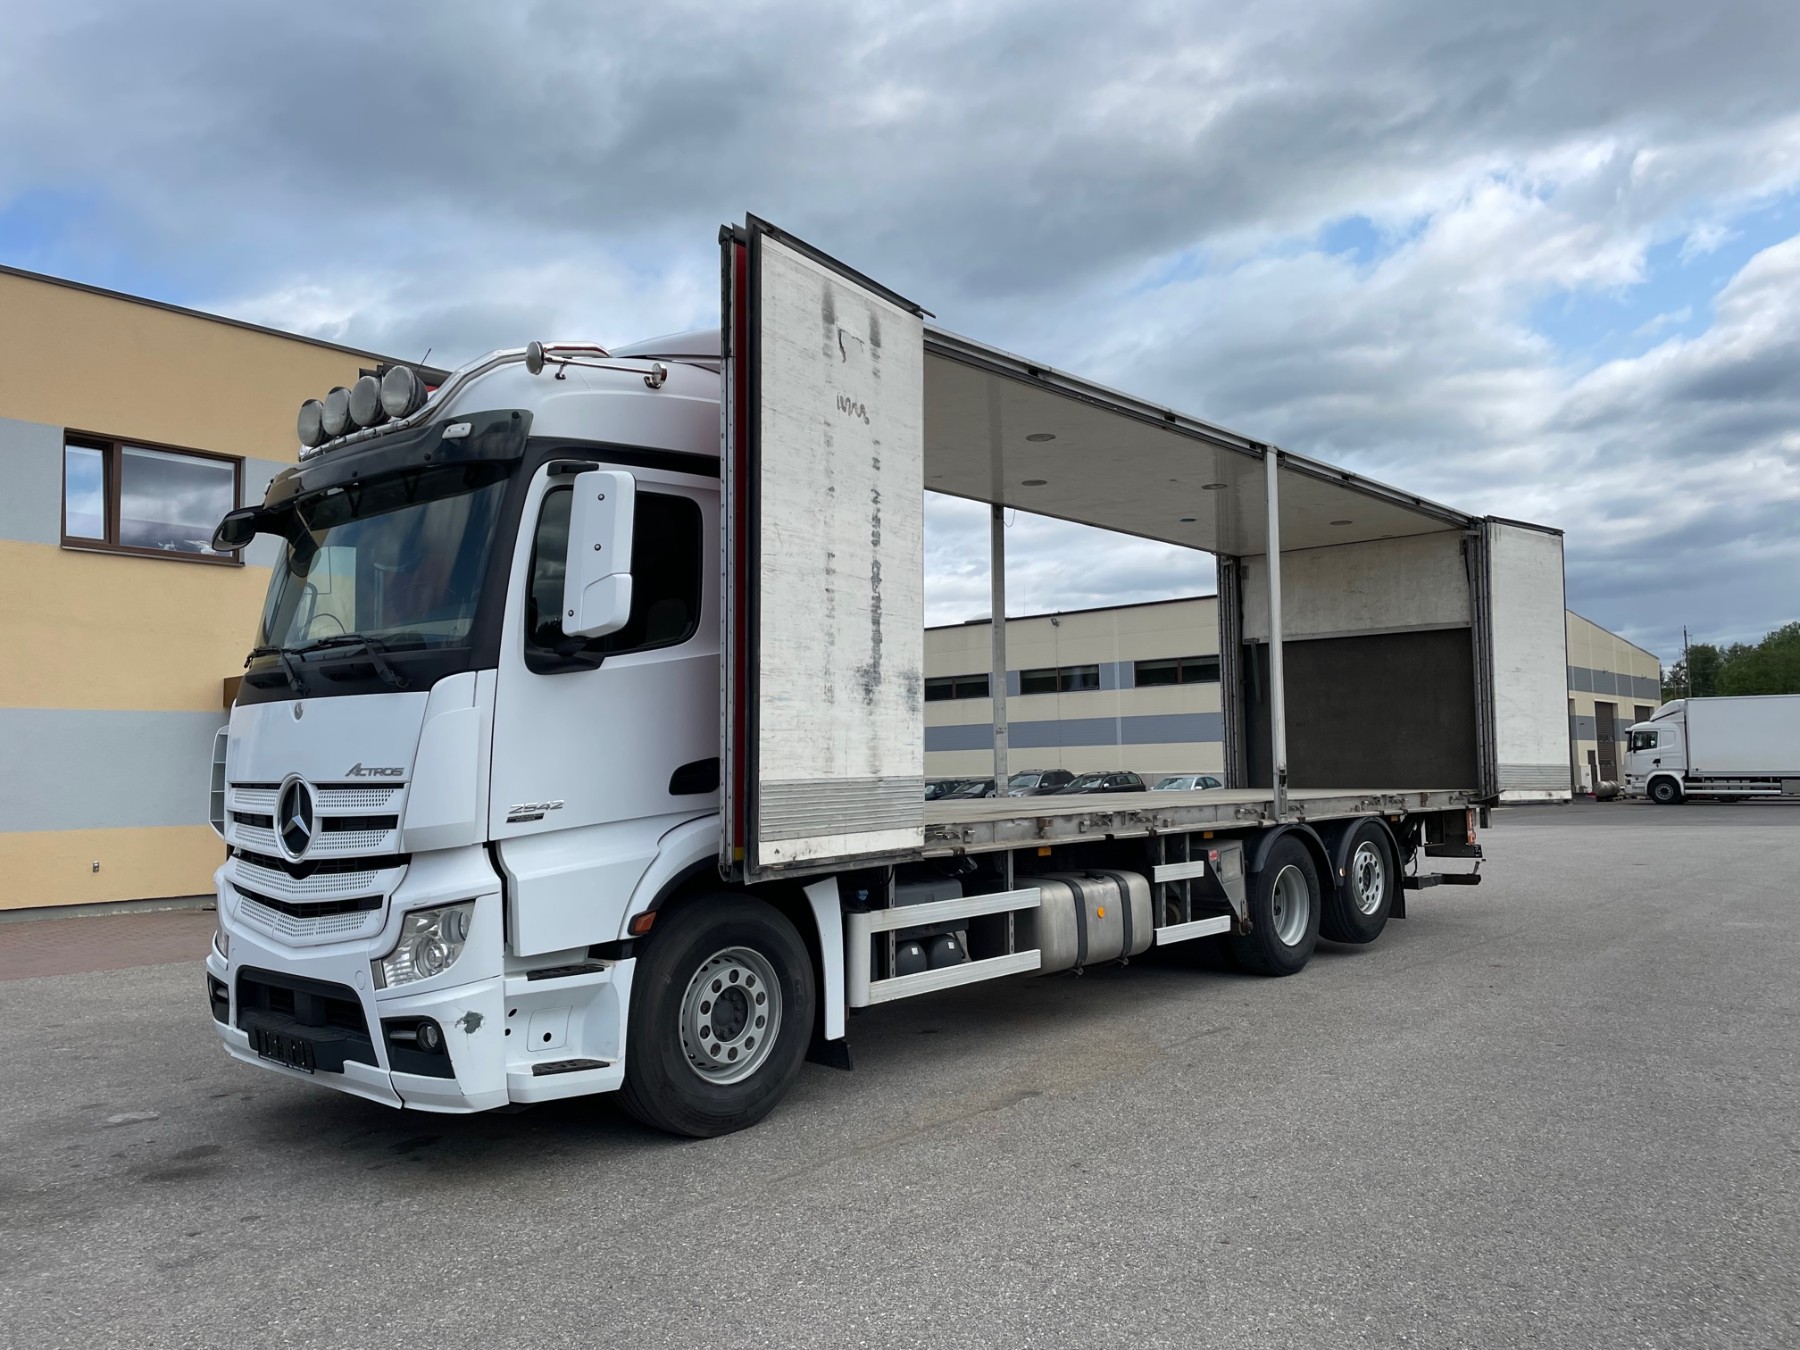 Mercedes-Benz Actros 2542 6x2*4 + SIDE OPENING 2X